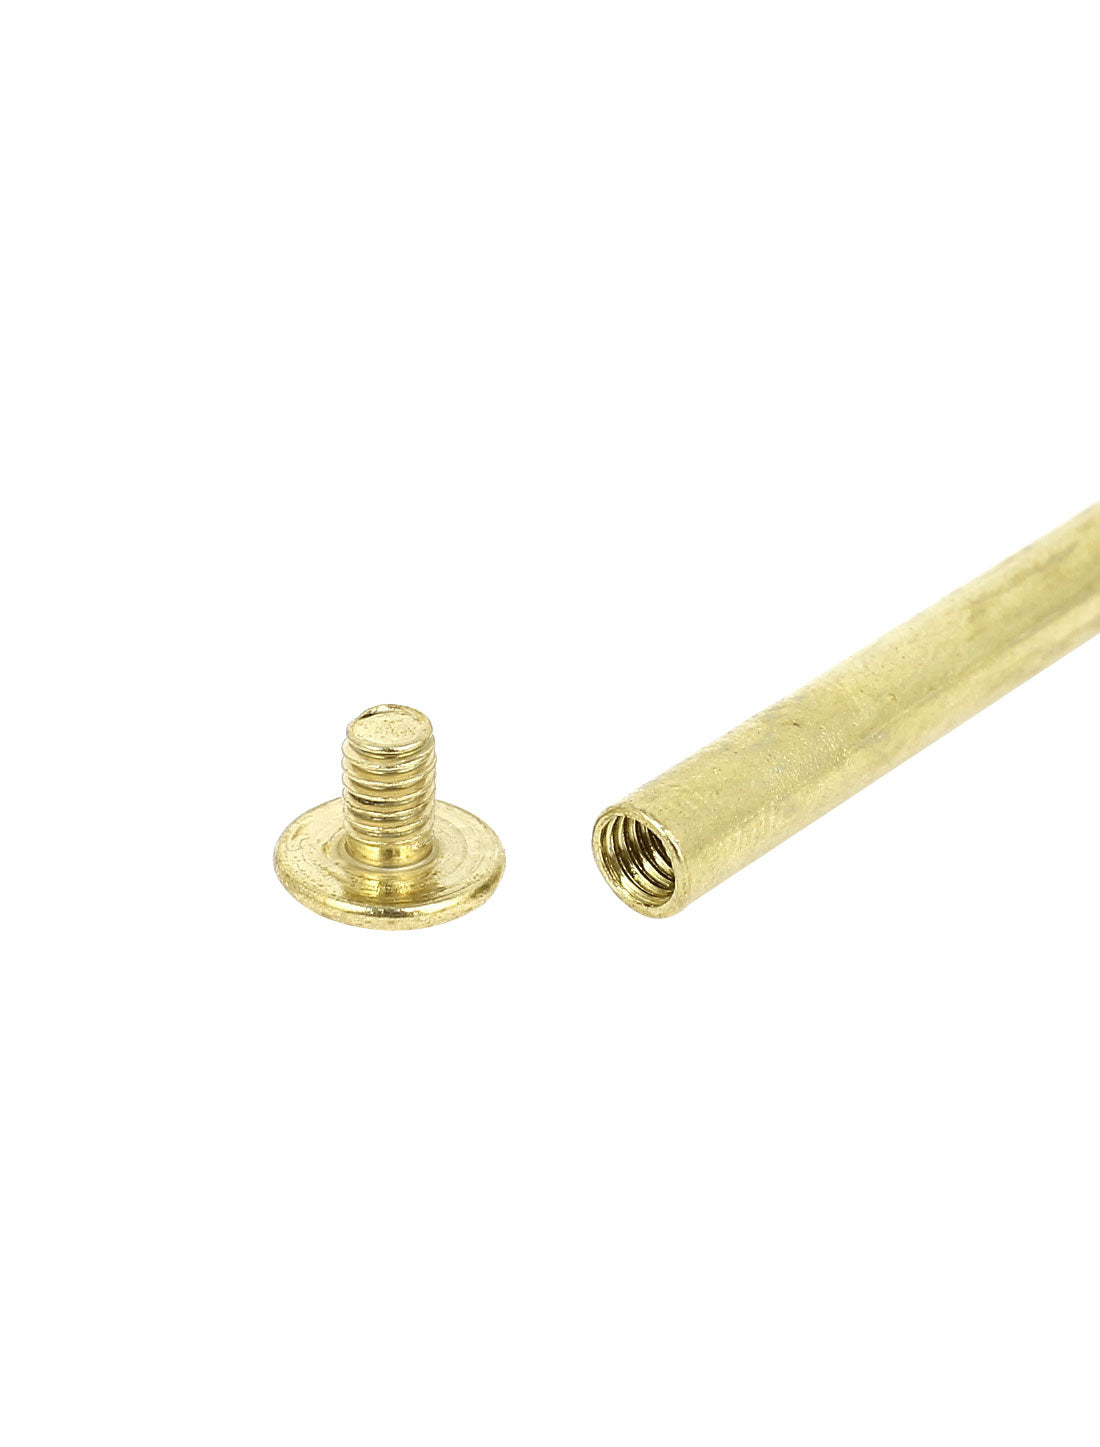 uxcell Uxcell Brass Plated 5x100mm Binding Chicago Screw Post 12pcs for Albums Scrapbook